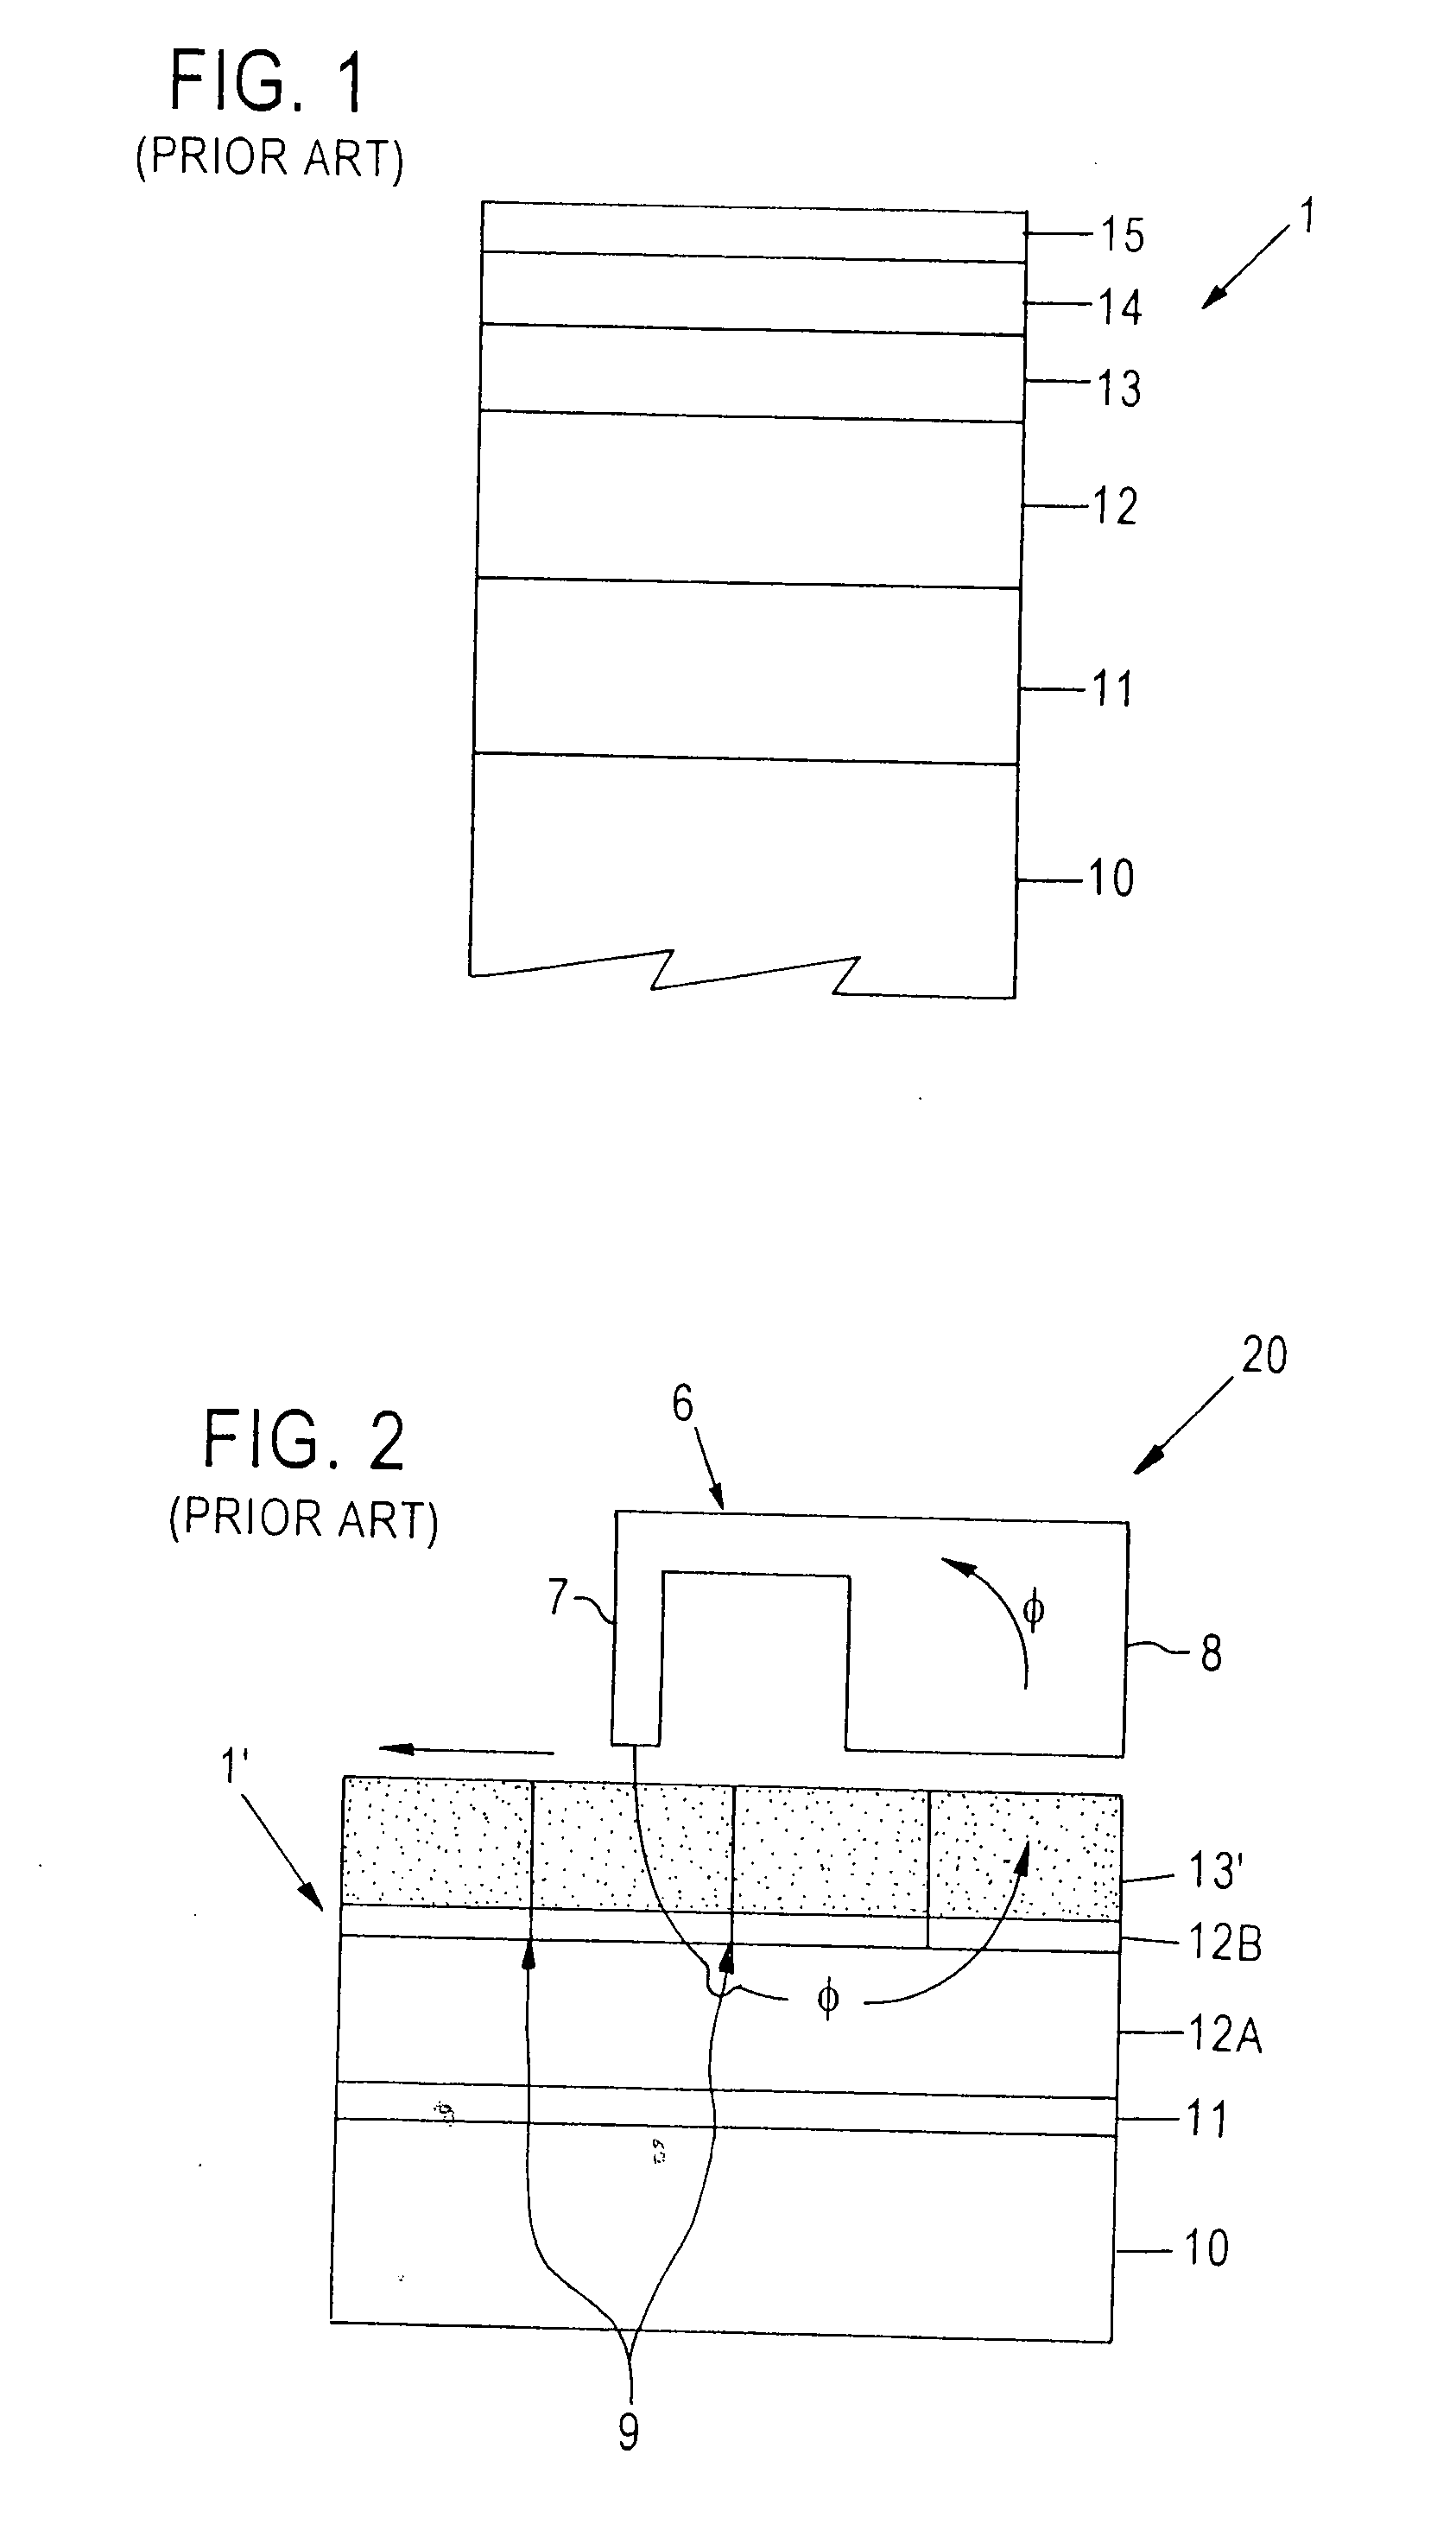 Magnetic media patterning via contact printing utilizing stamper having magnetic pattern formed in non-magnetic substrate